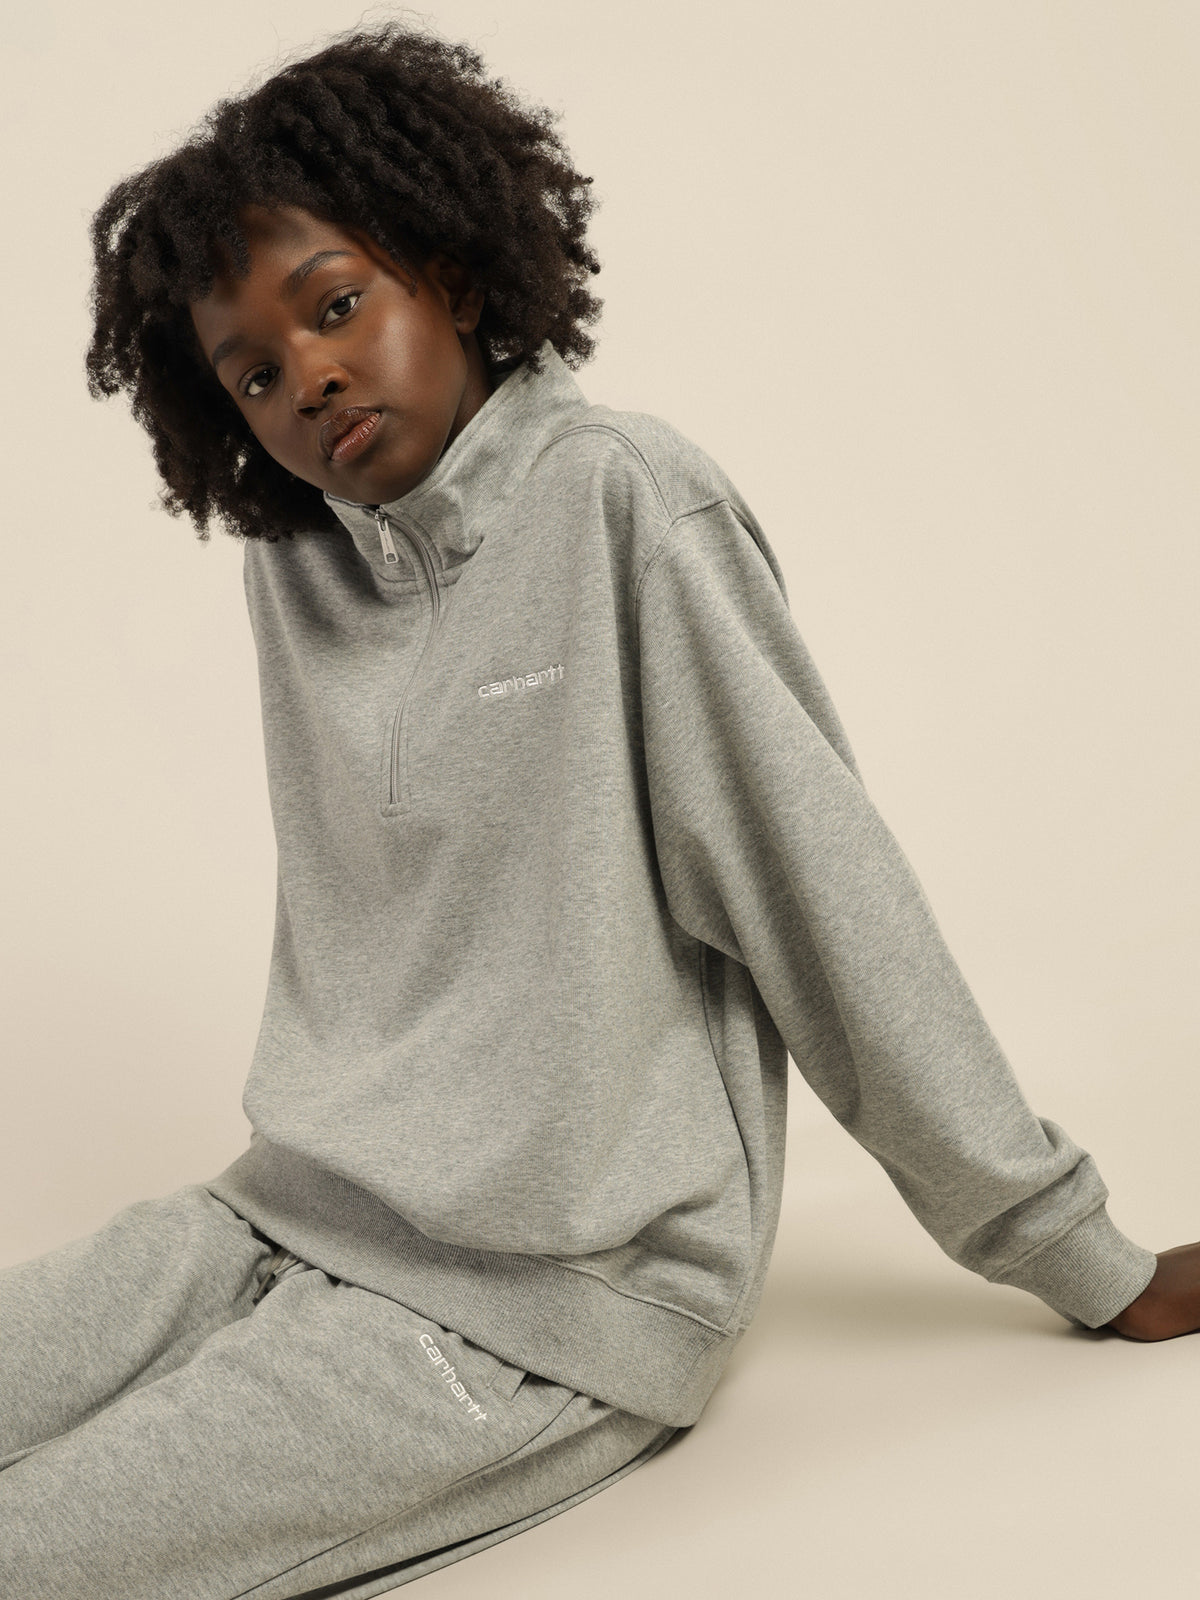 Script Embroidery Highneck Sweater in Grey Heather